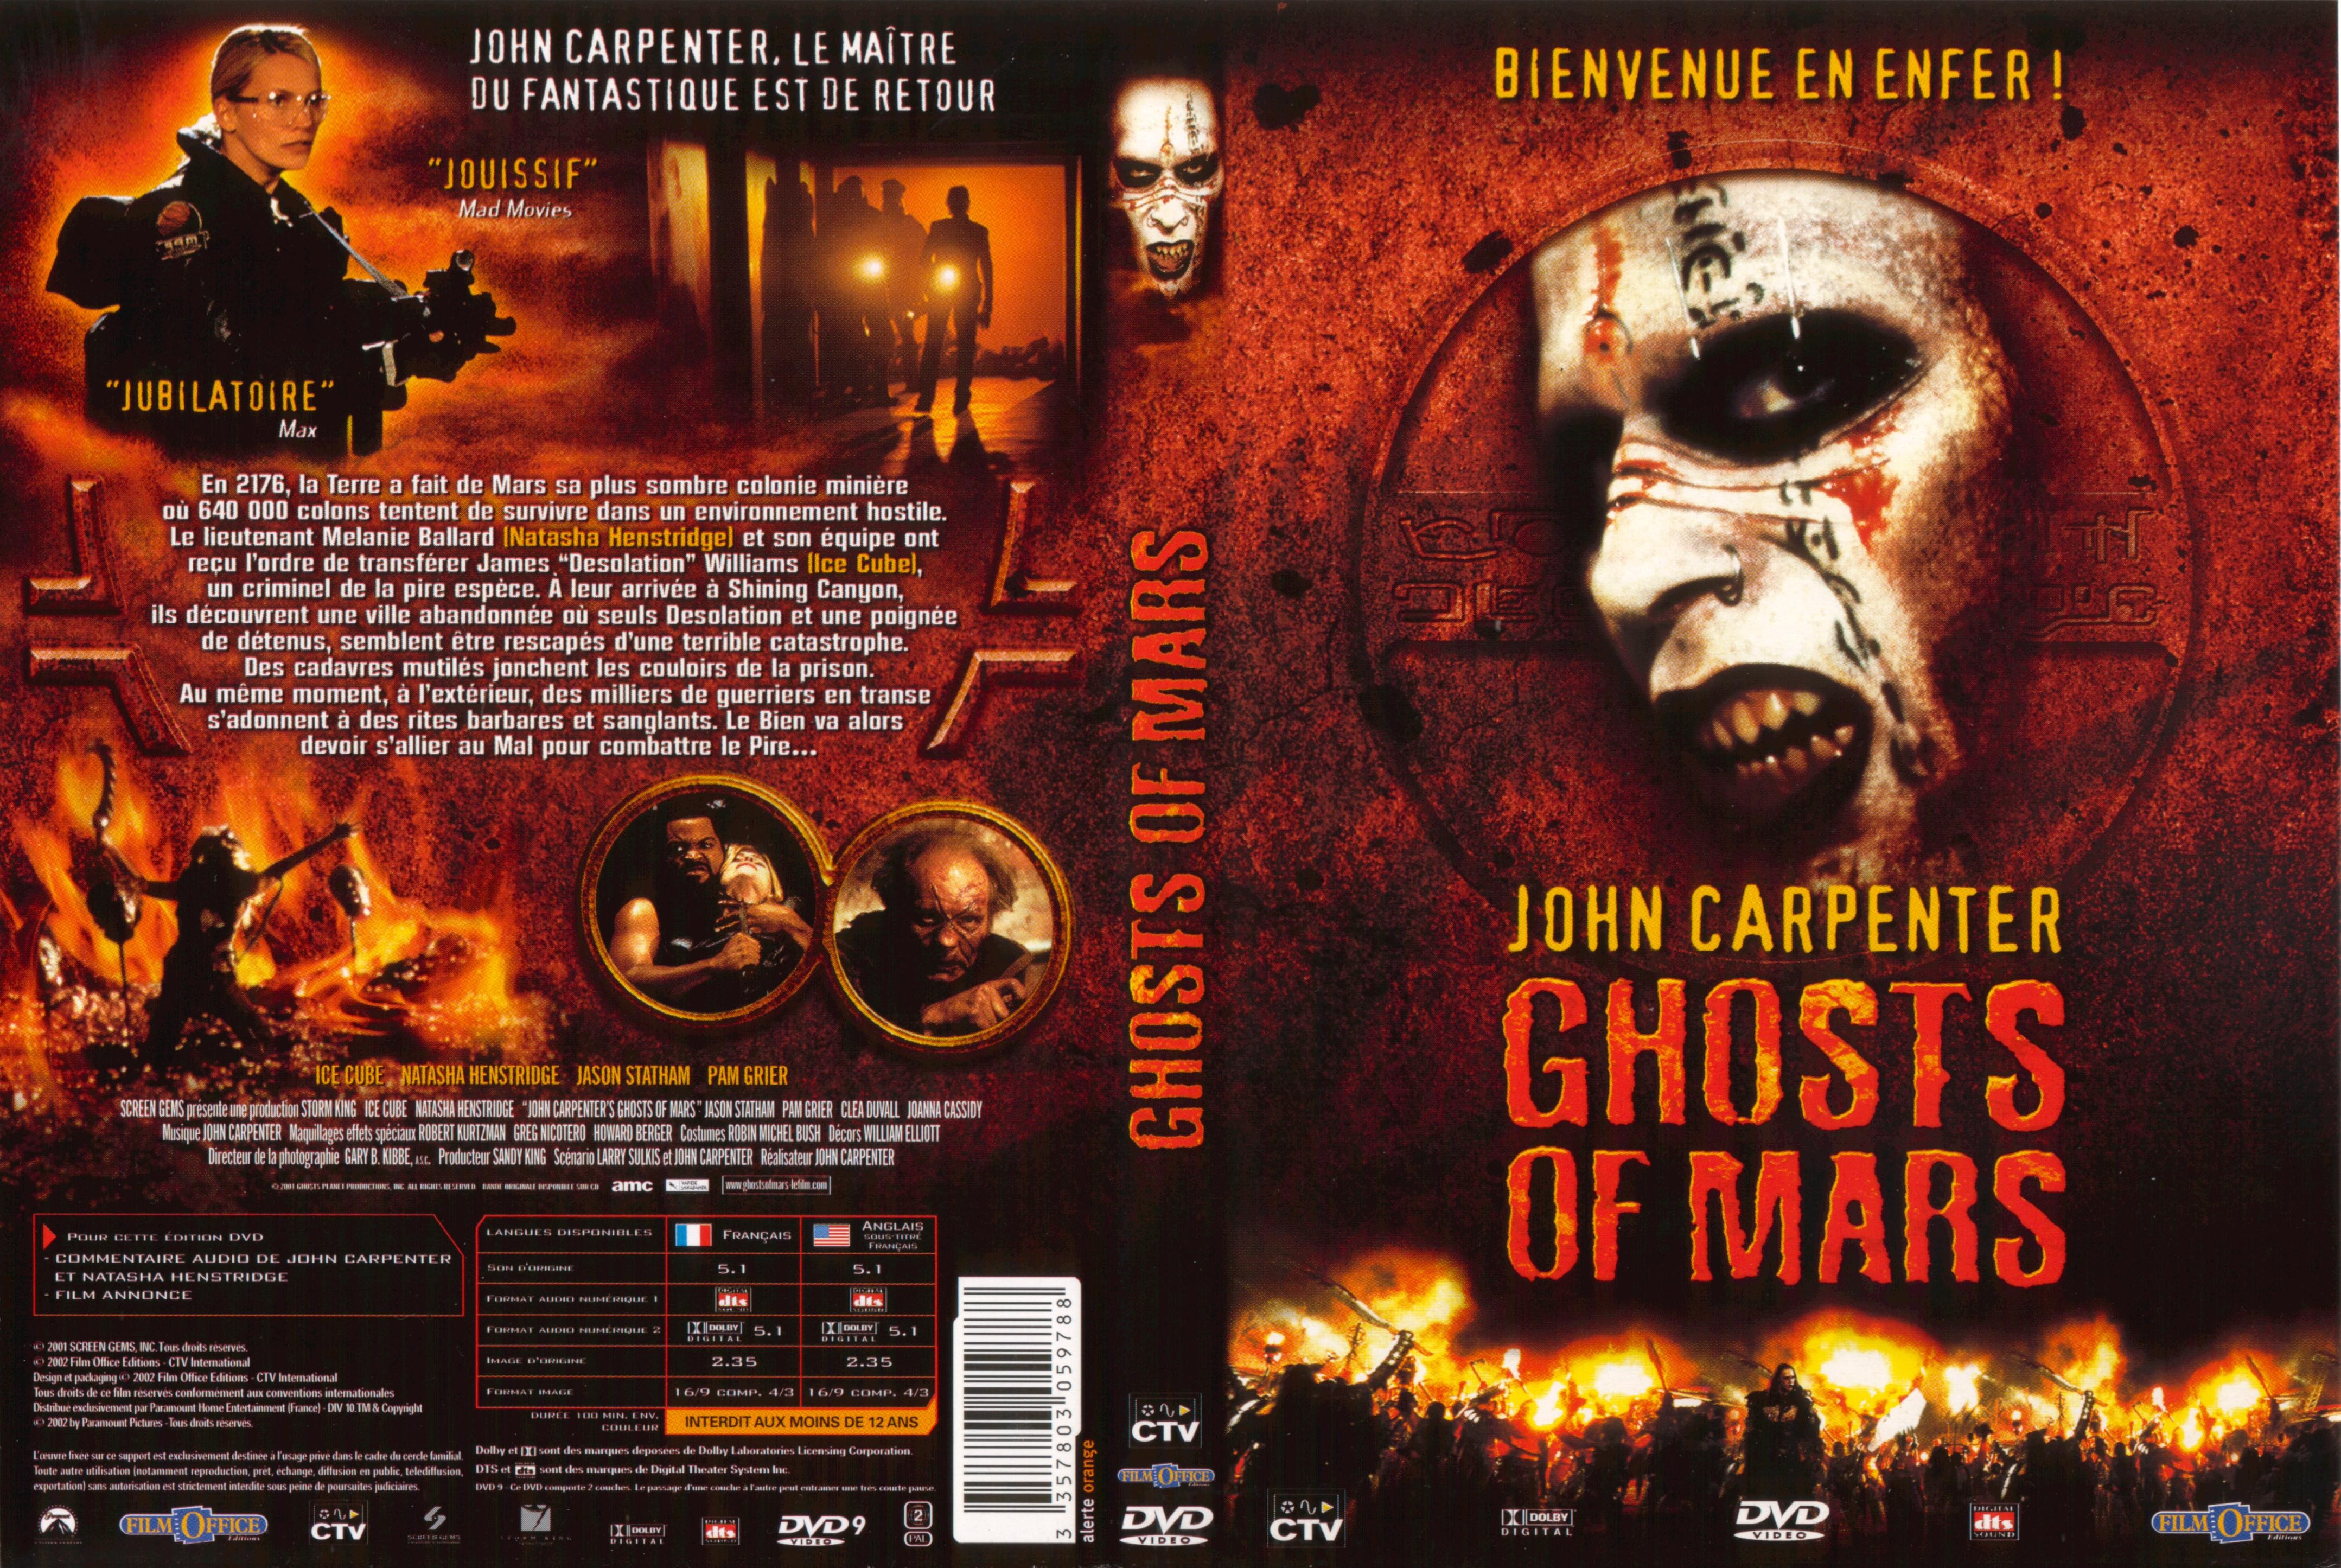 Jaquette DVD Ghosts of Mars